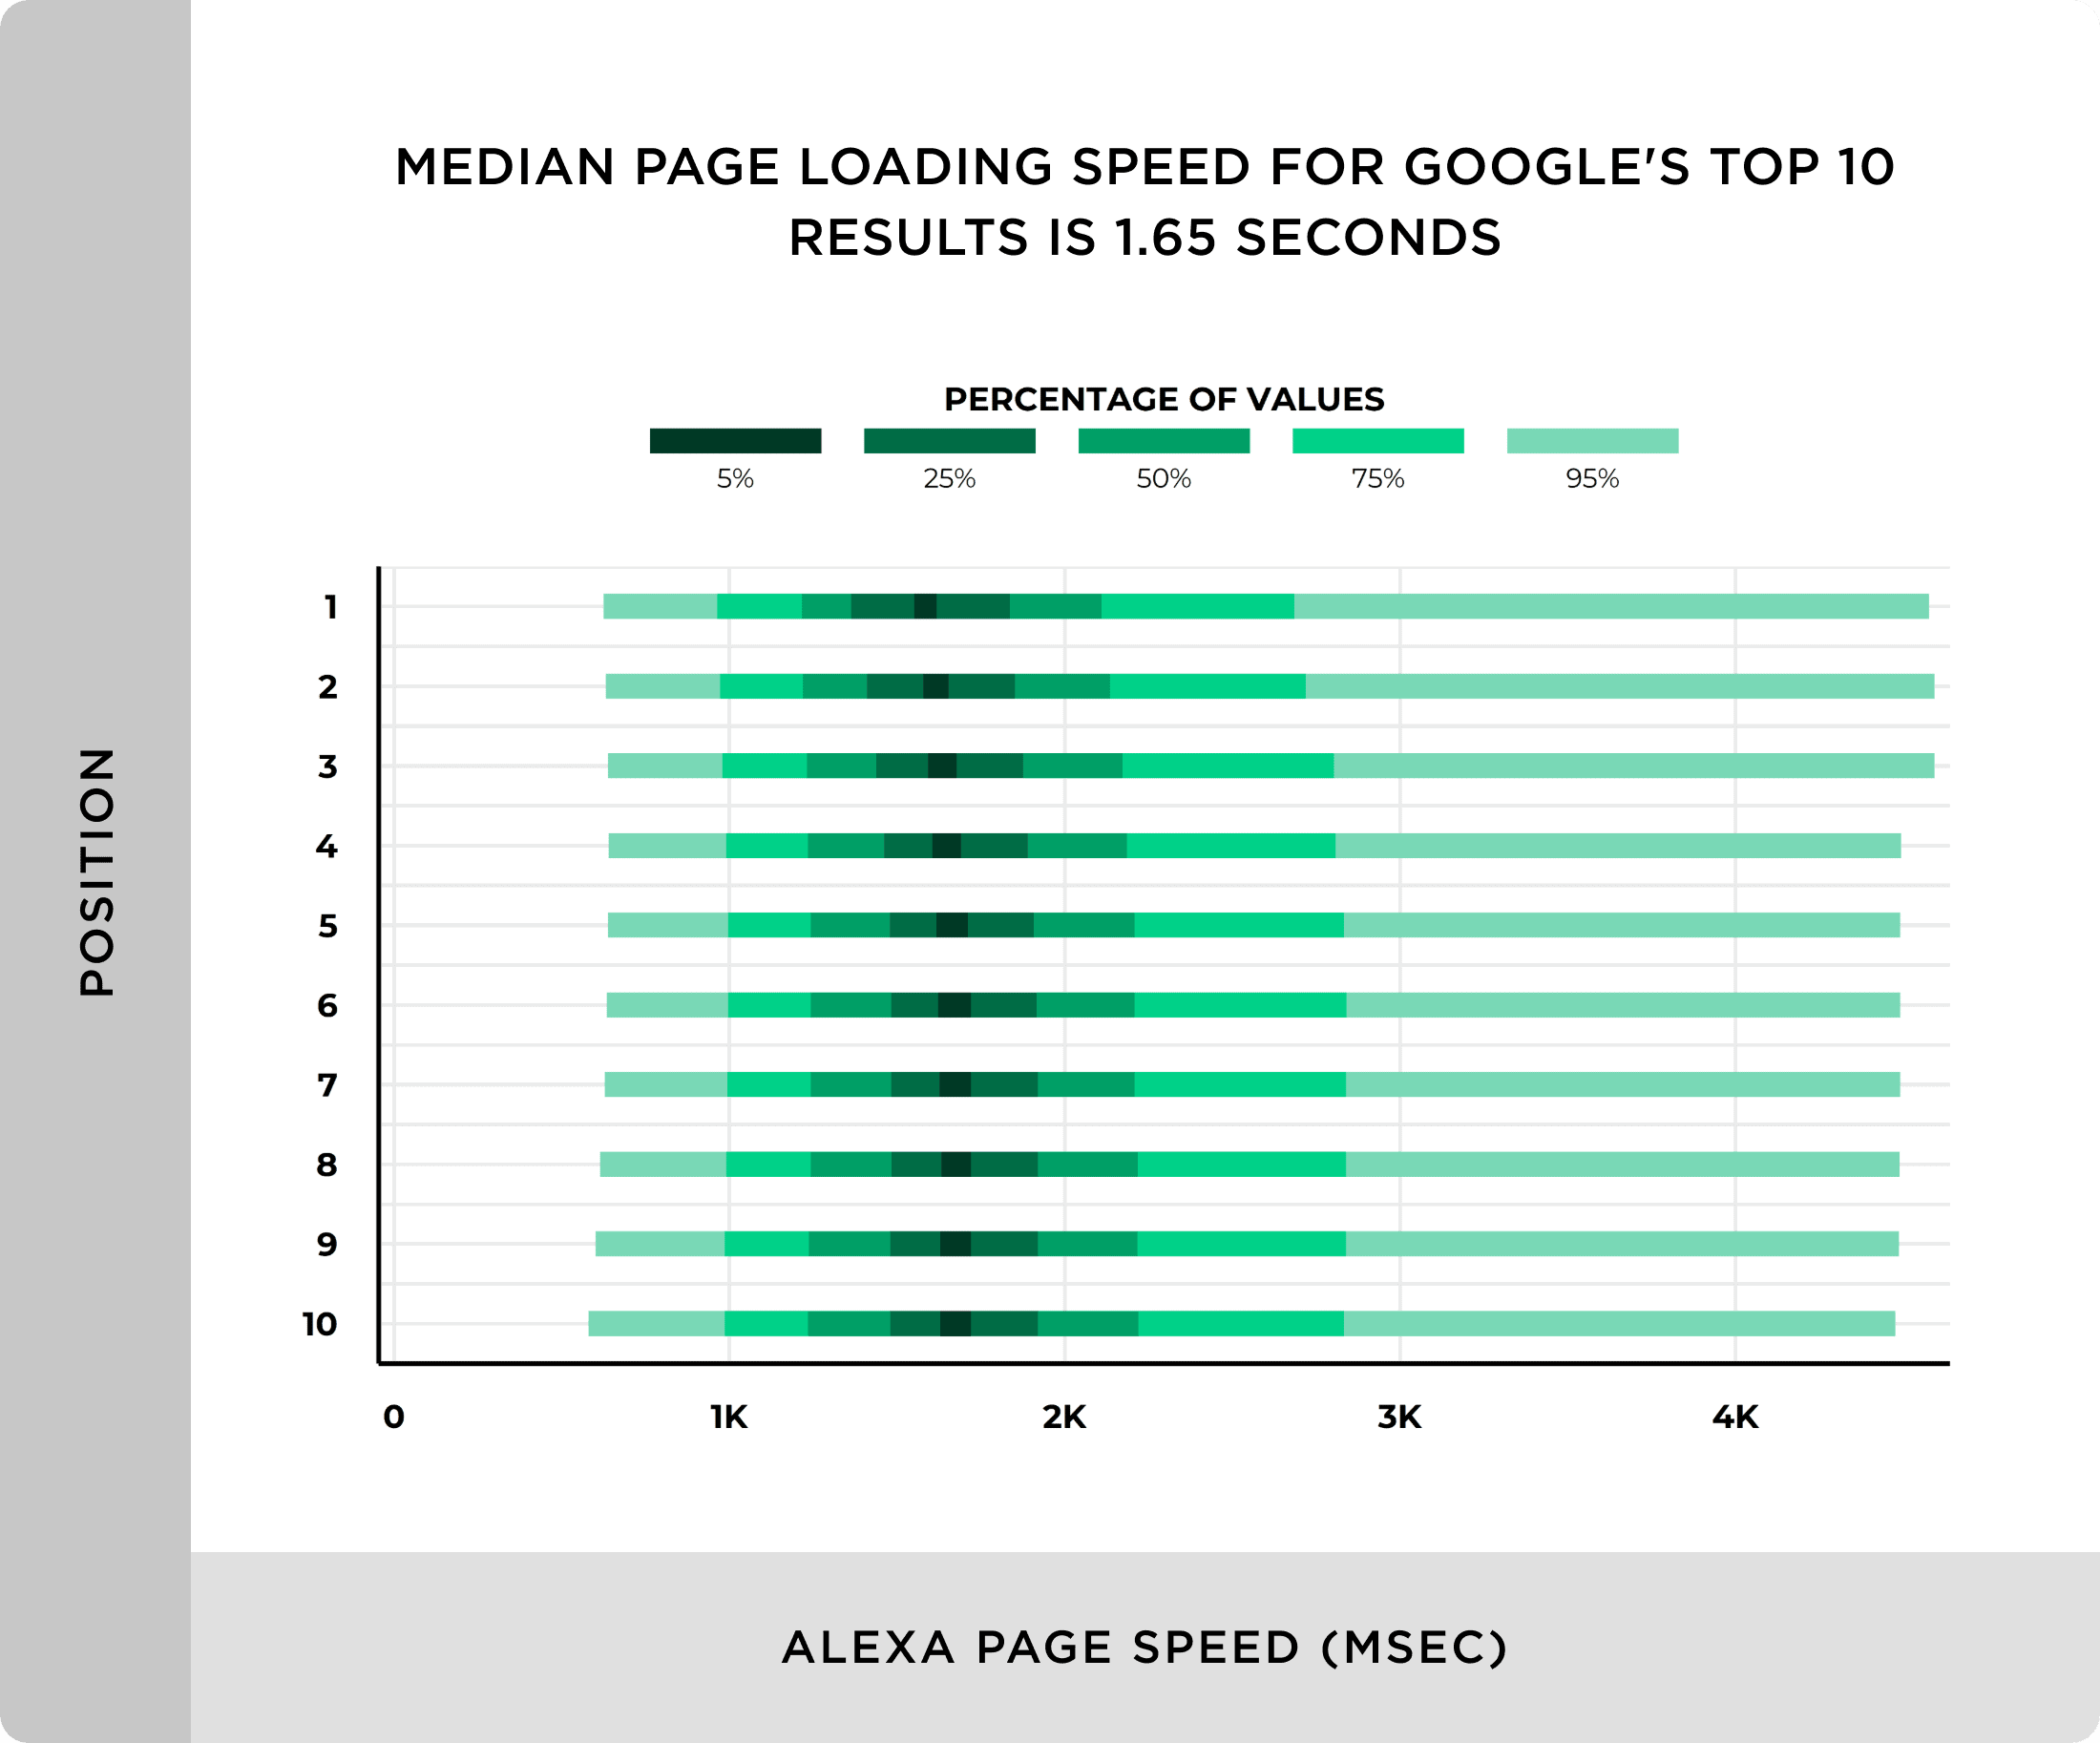 Median page loading speed for Googles top 10 results is under 2 seconds